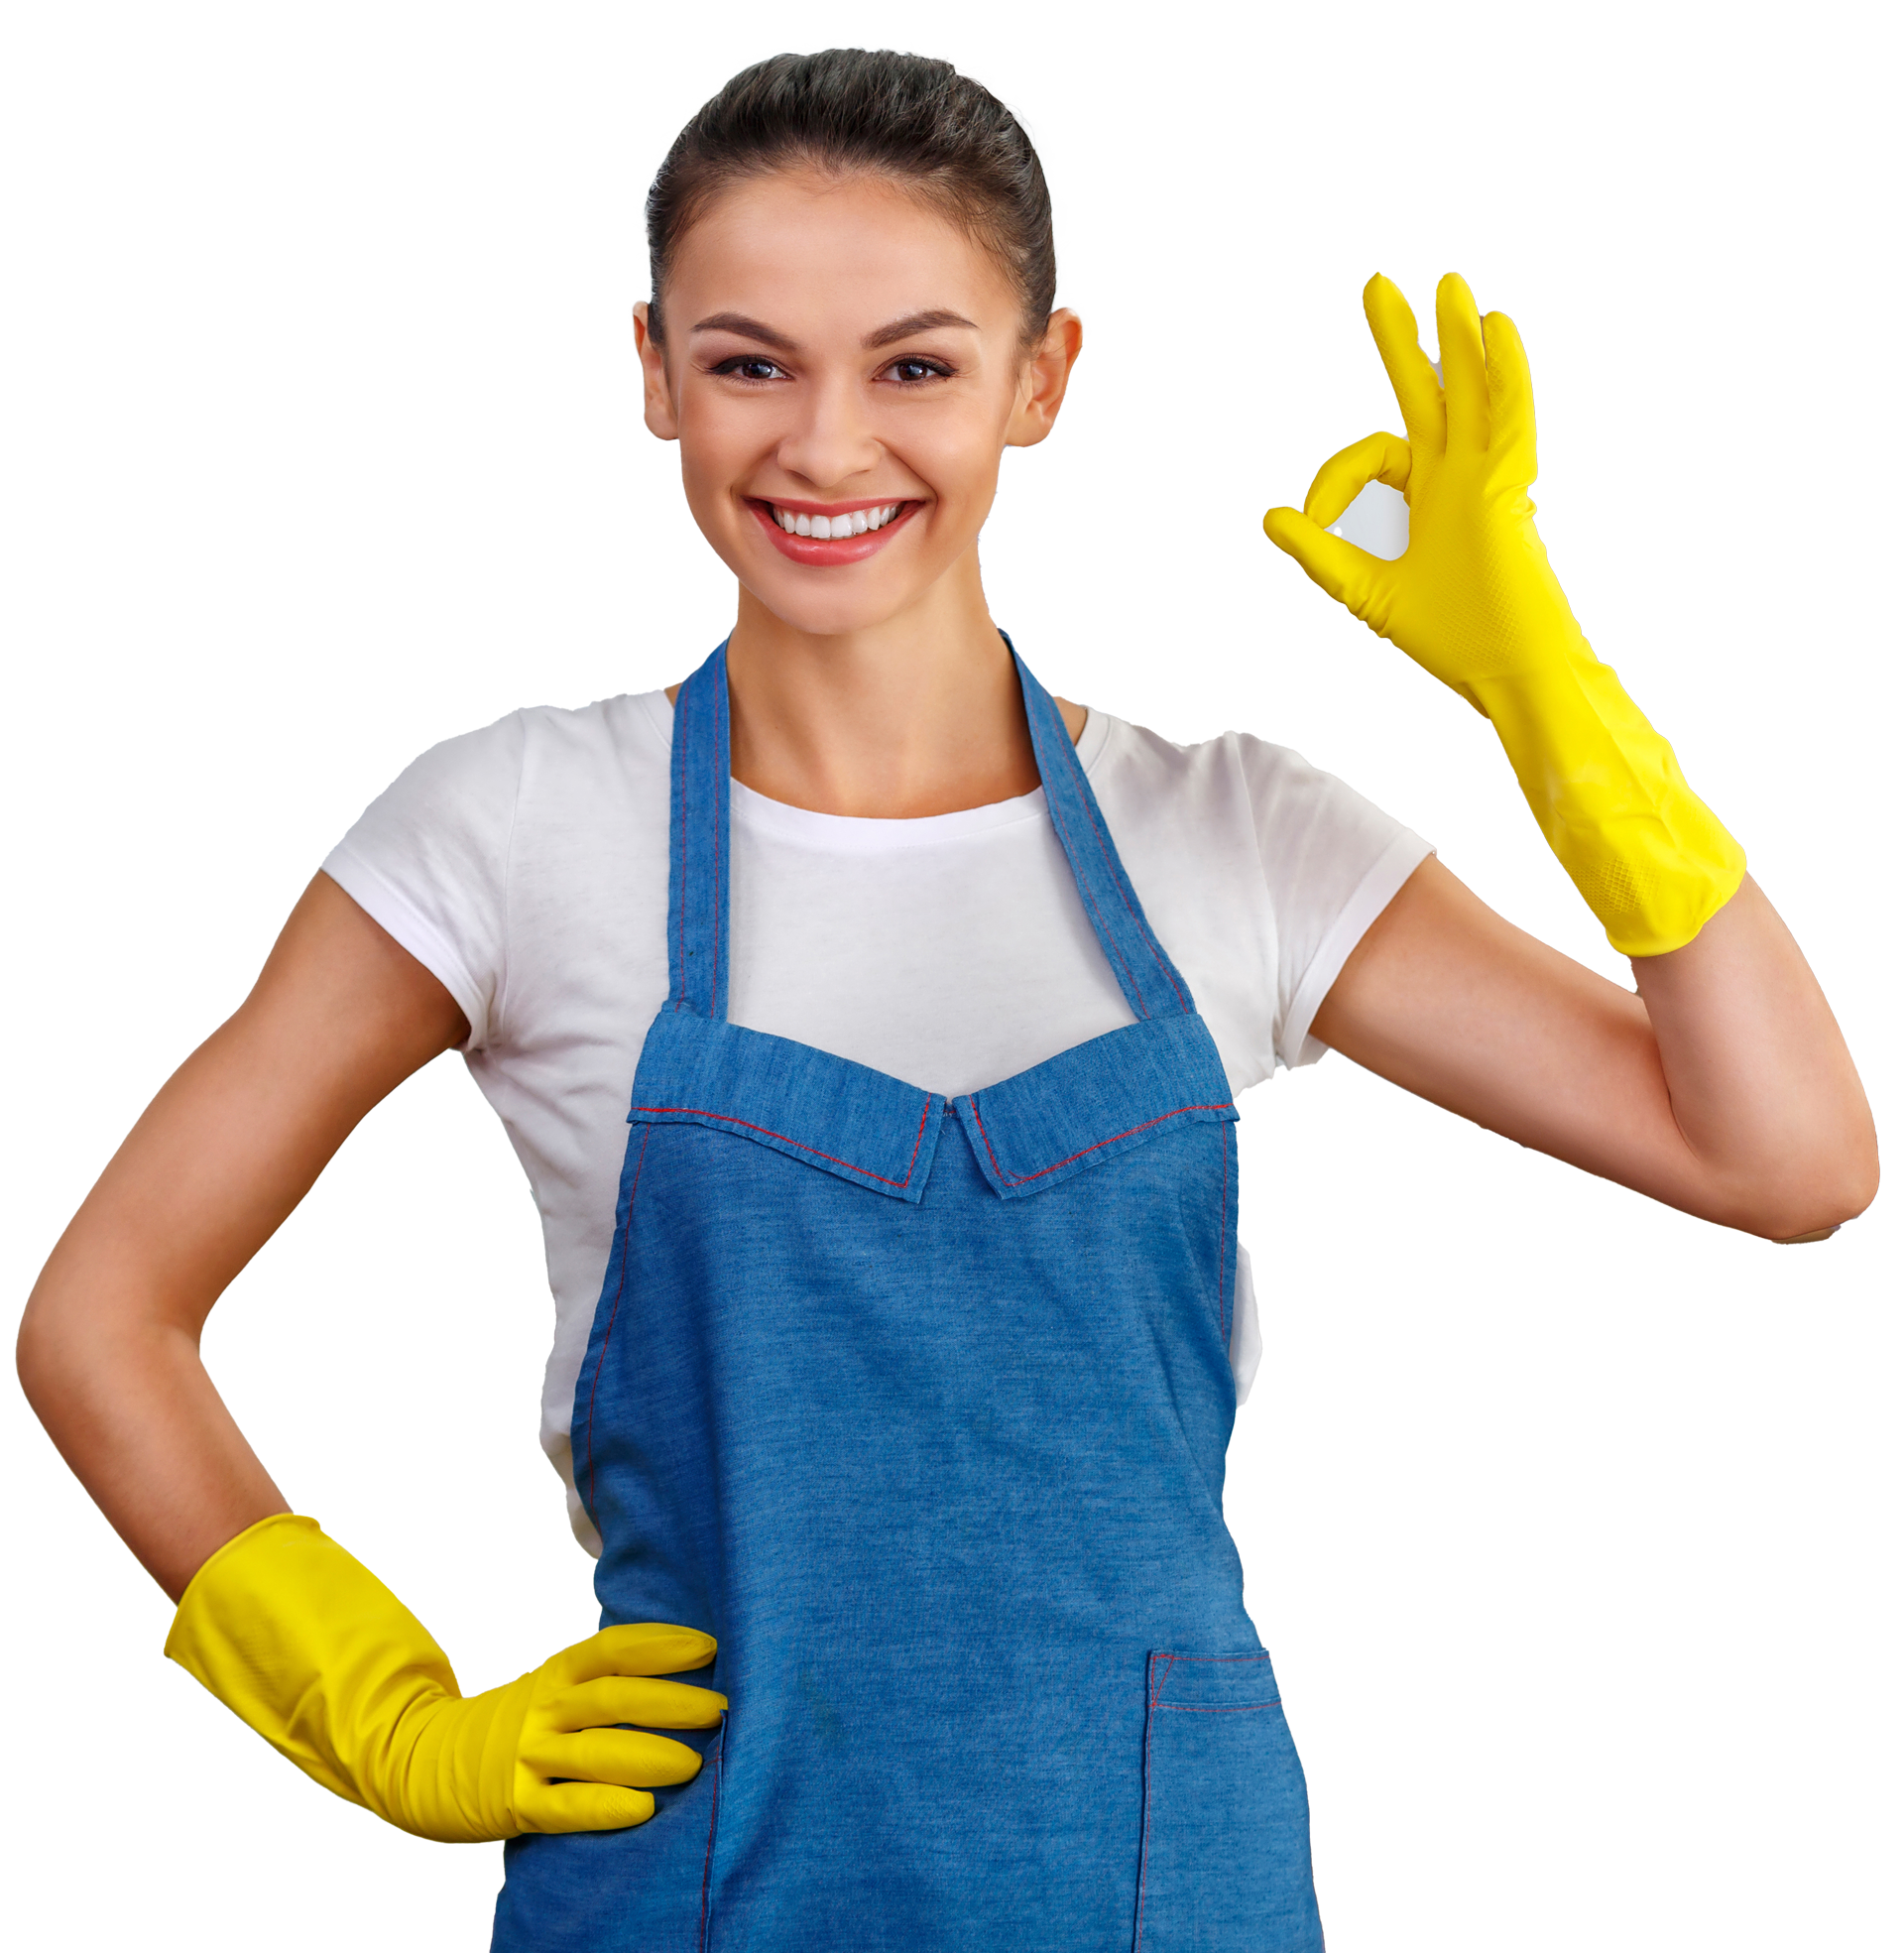 A woman wearing a blue apron and yellow gloves is giving an ok sign